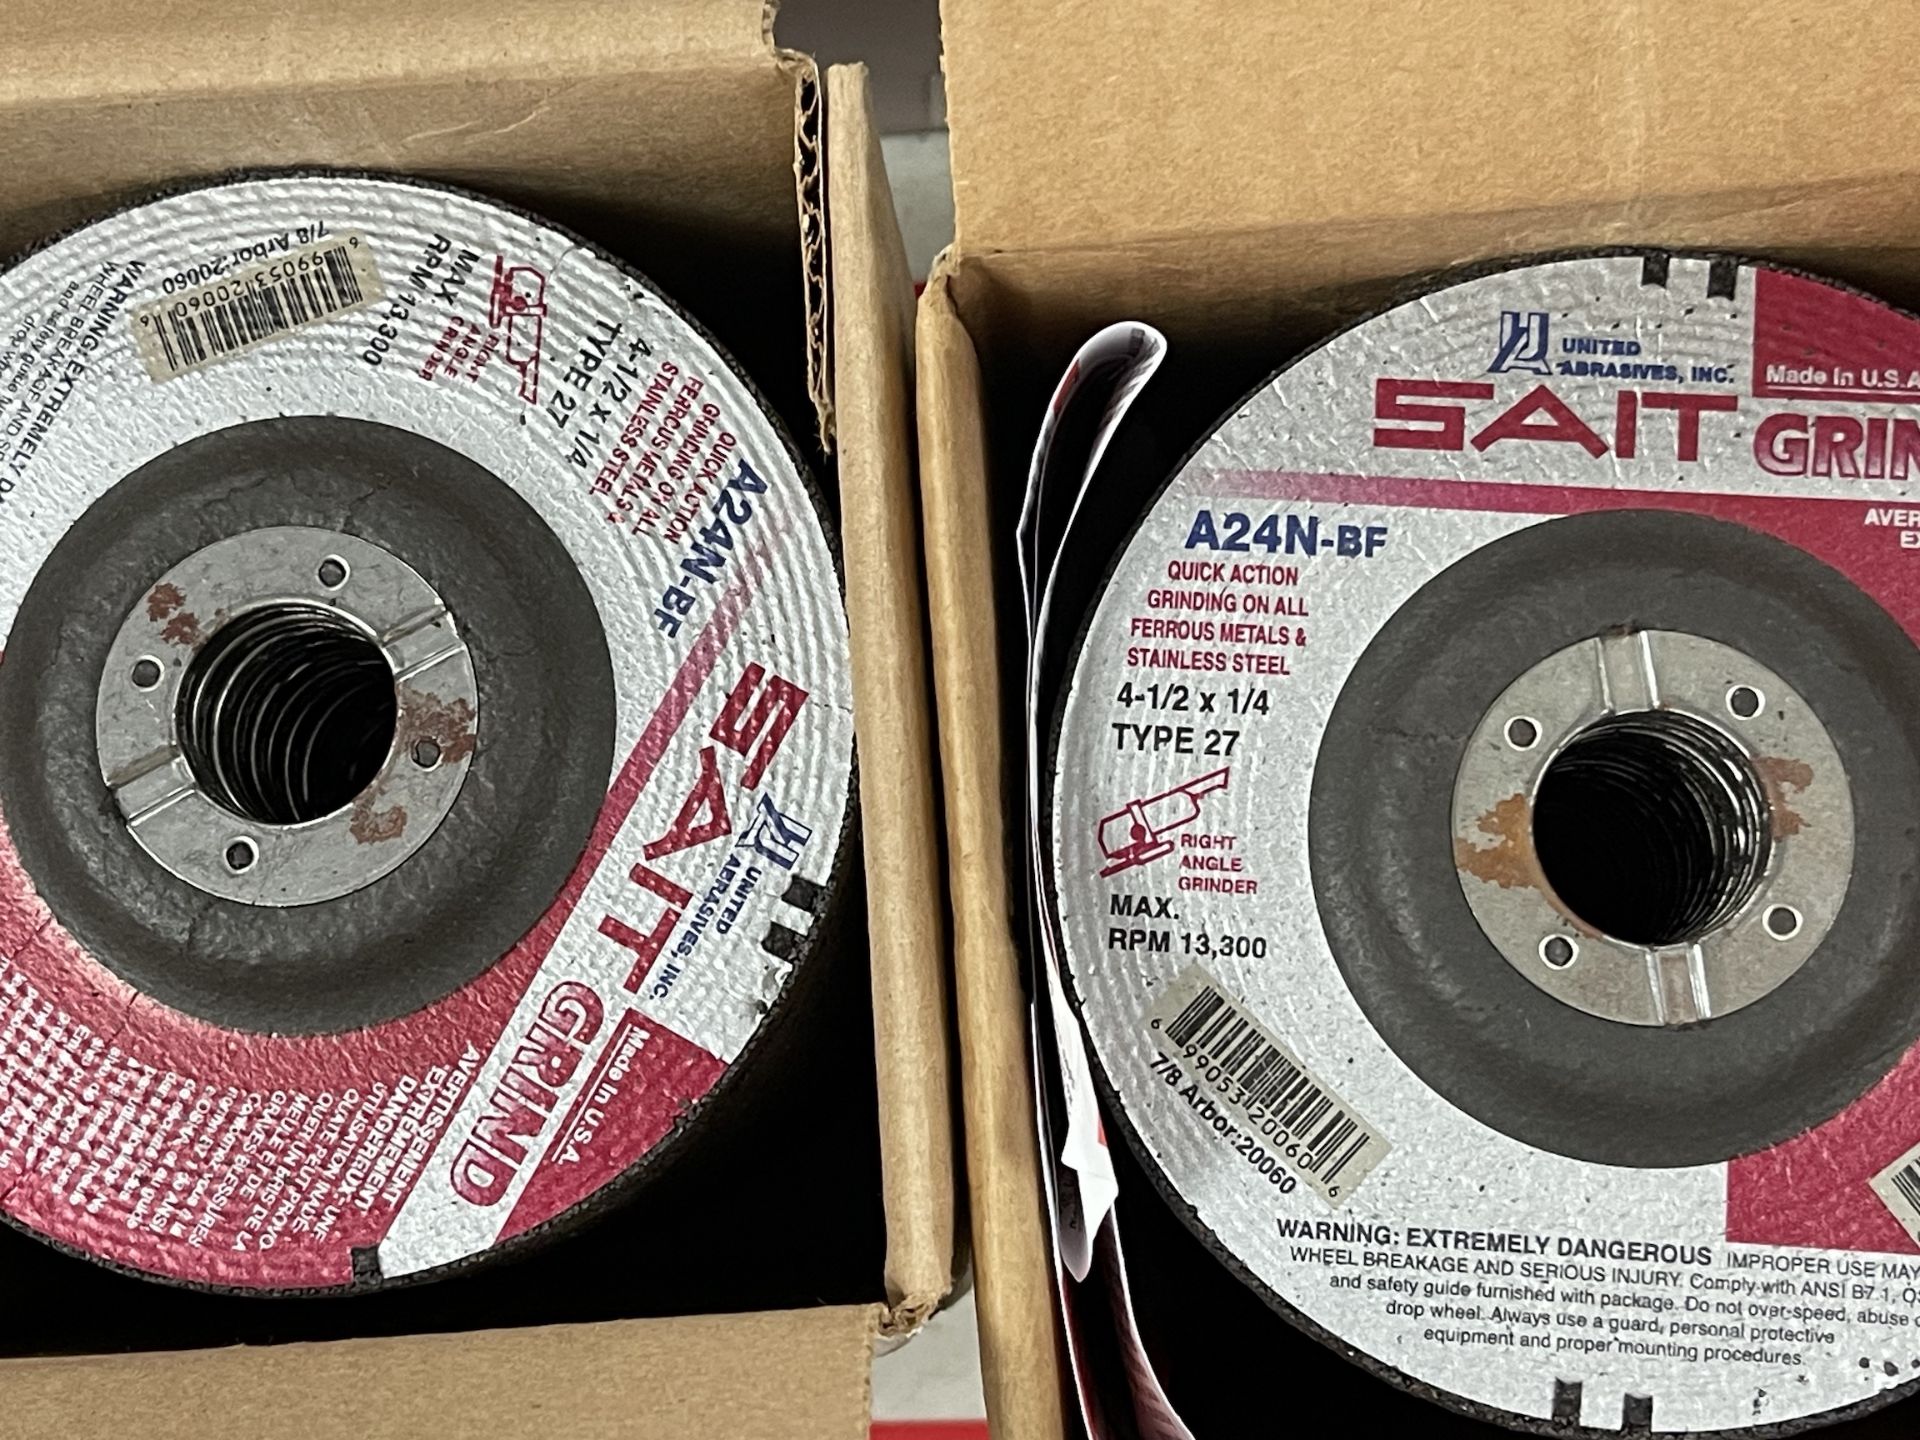 Lot of Brand New Type 27 Depressed Center Grinding Wheels - Upland - Image 4 of 6